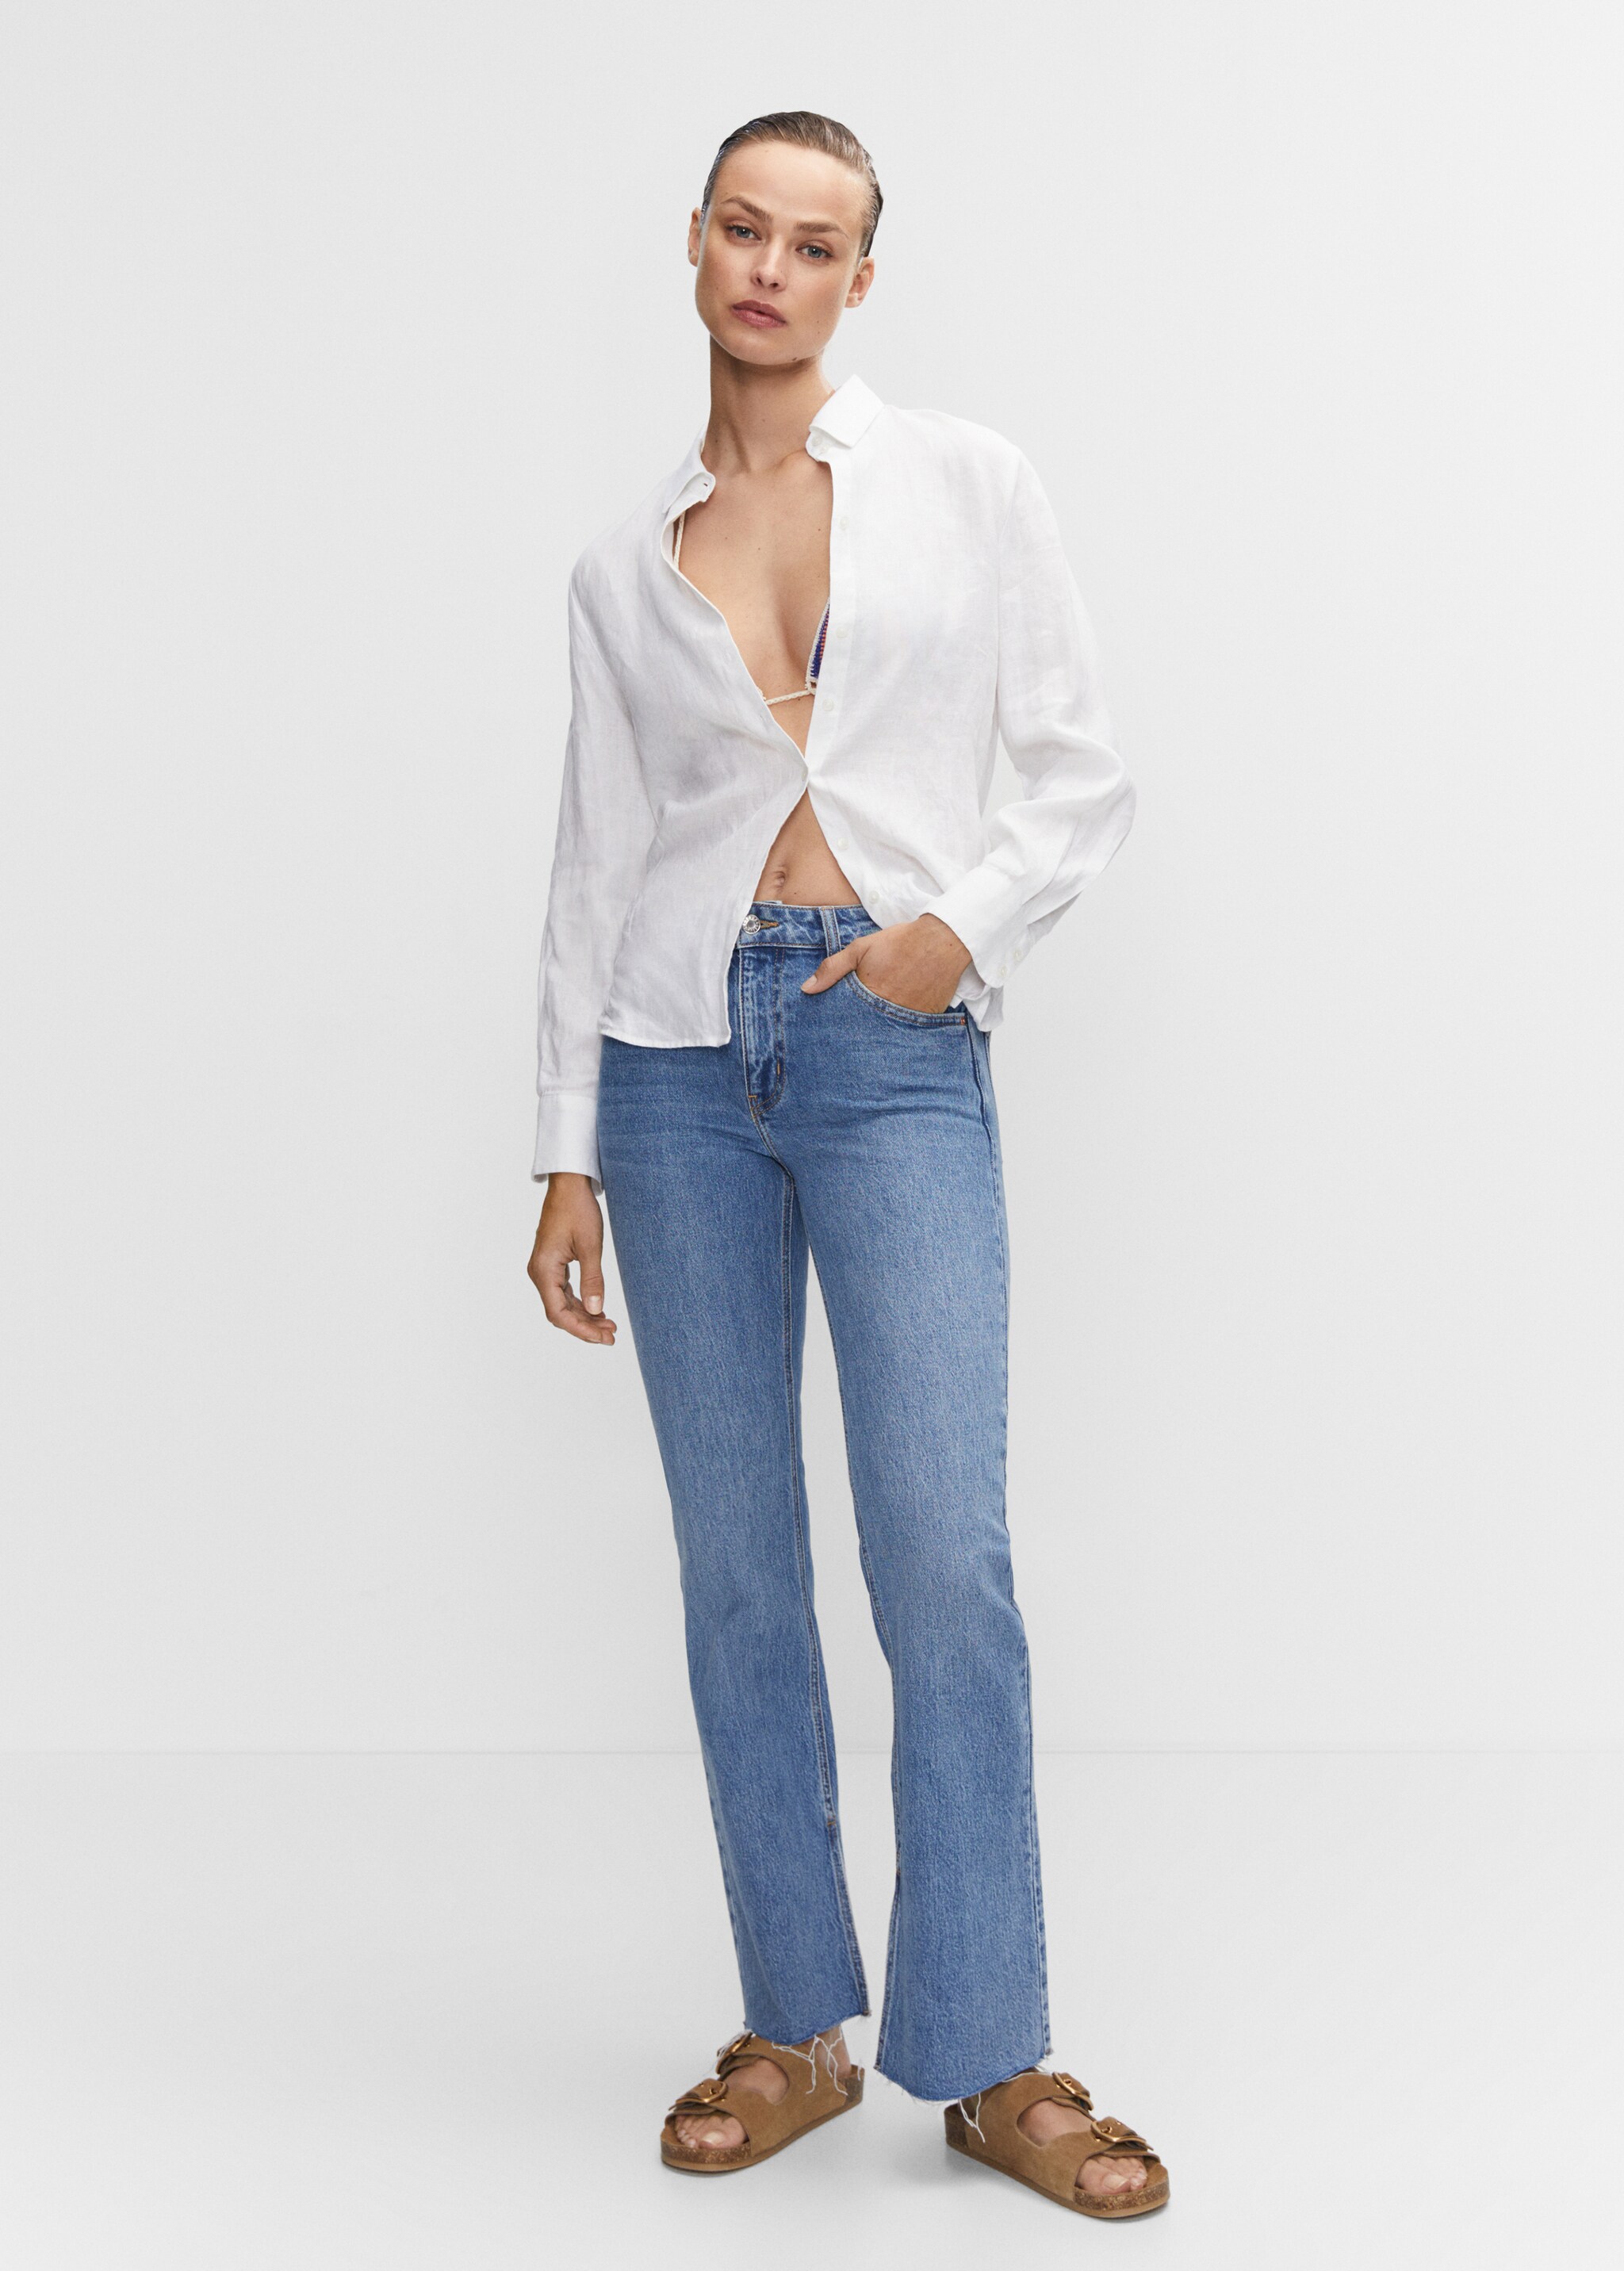 Medium-rise straight jeans with slits - General plane